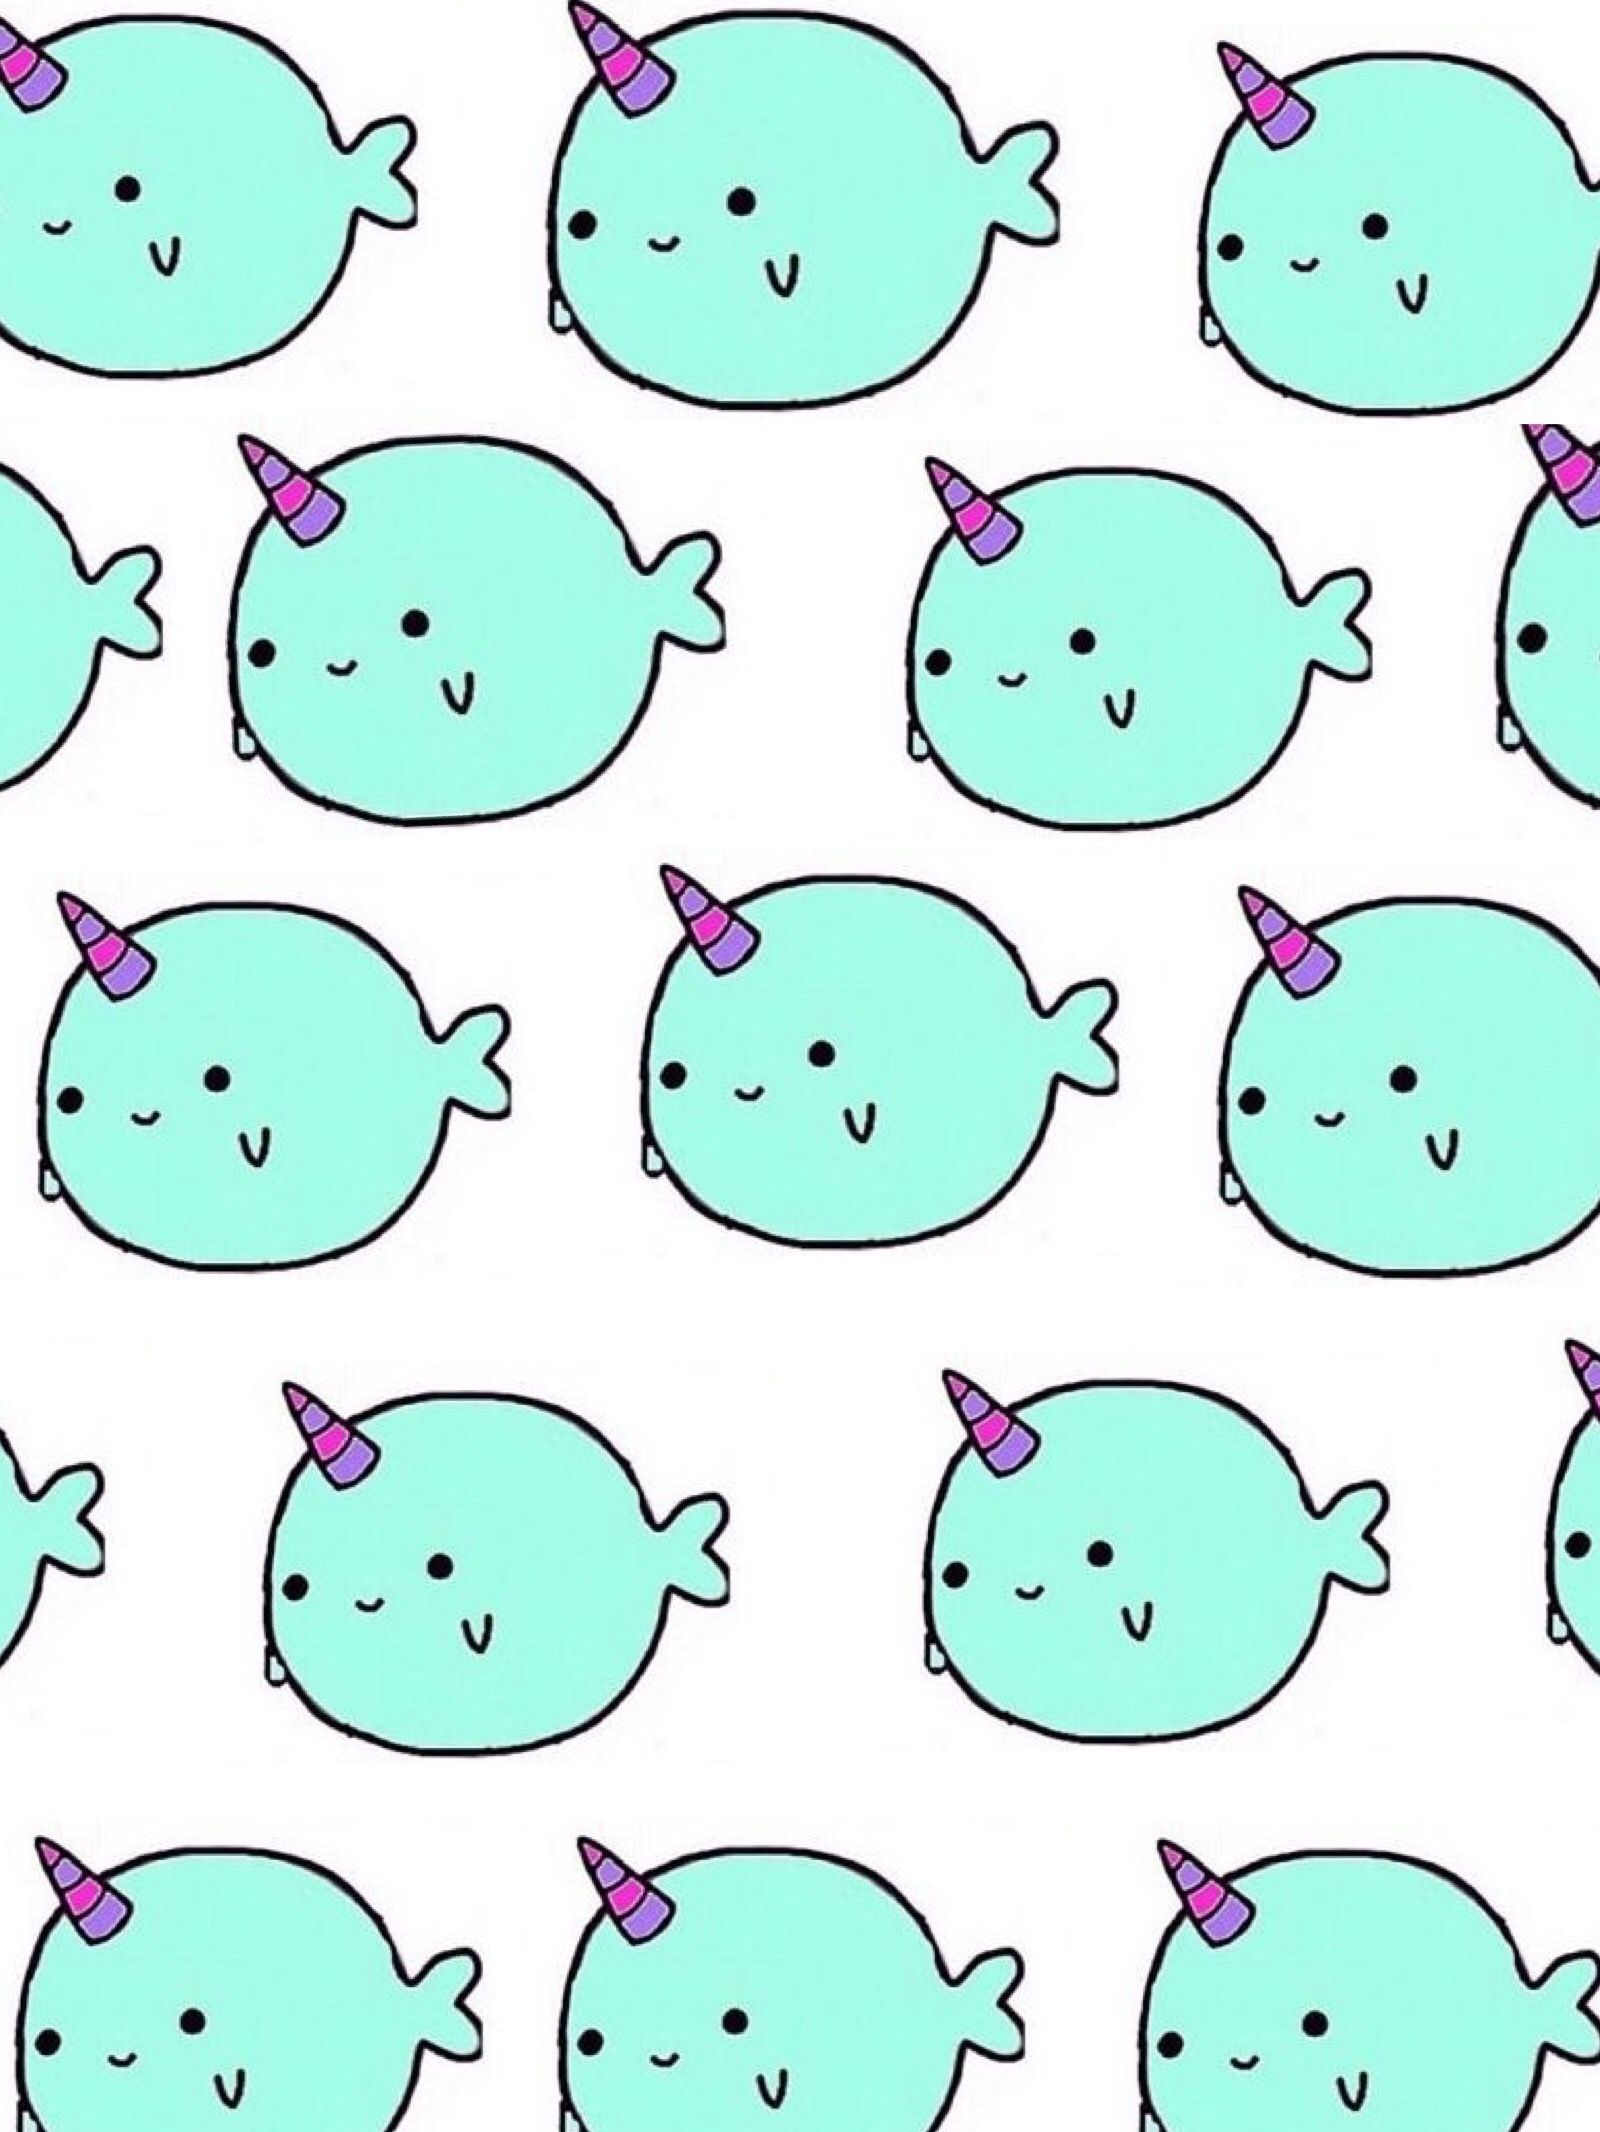 Narwhal Wallpaper Adorable Cute